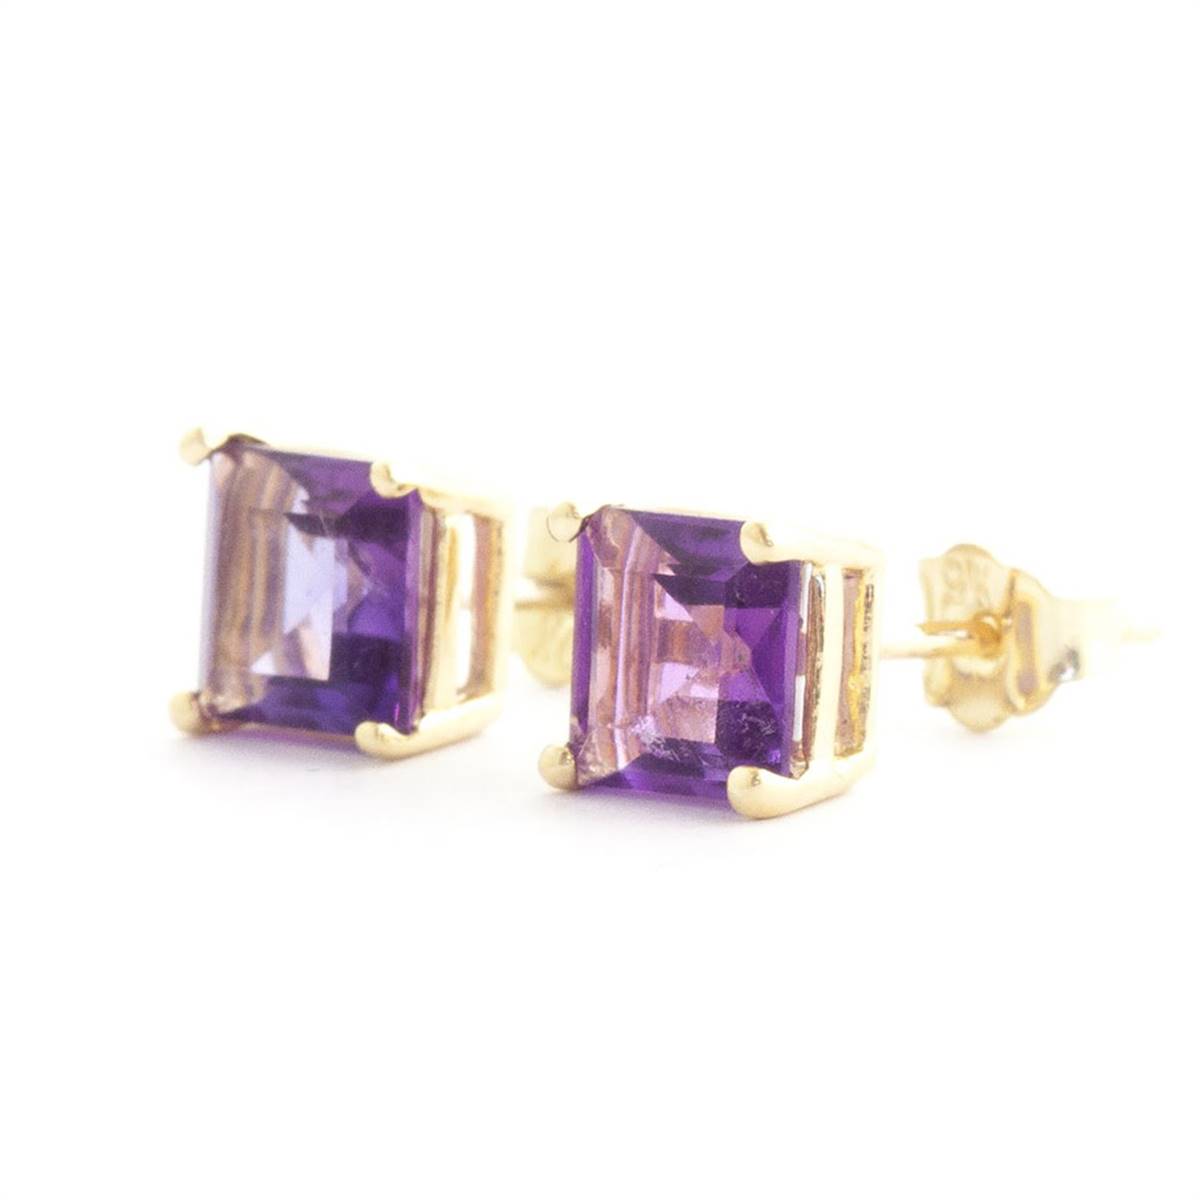 1.75 Carat 14K Solid Yellow Gold Accomplished Amethyst Earrings